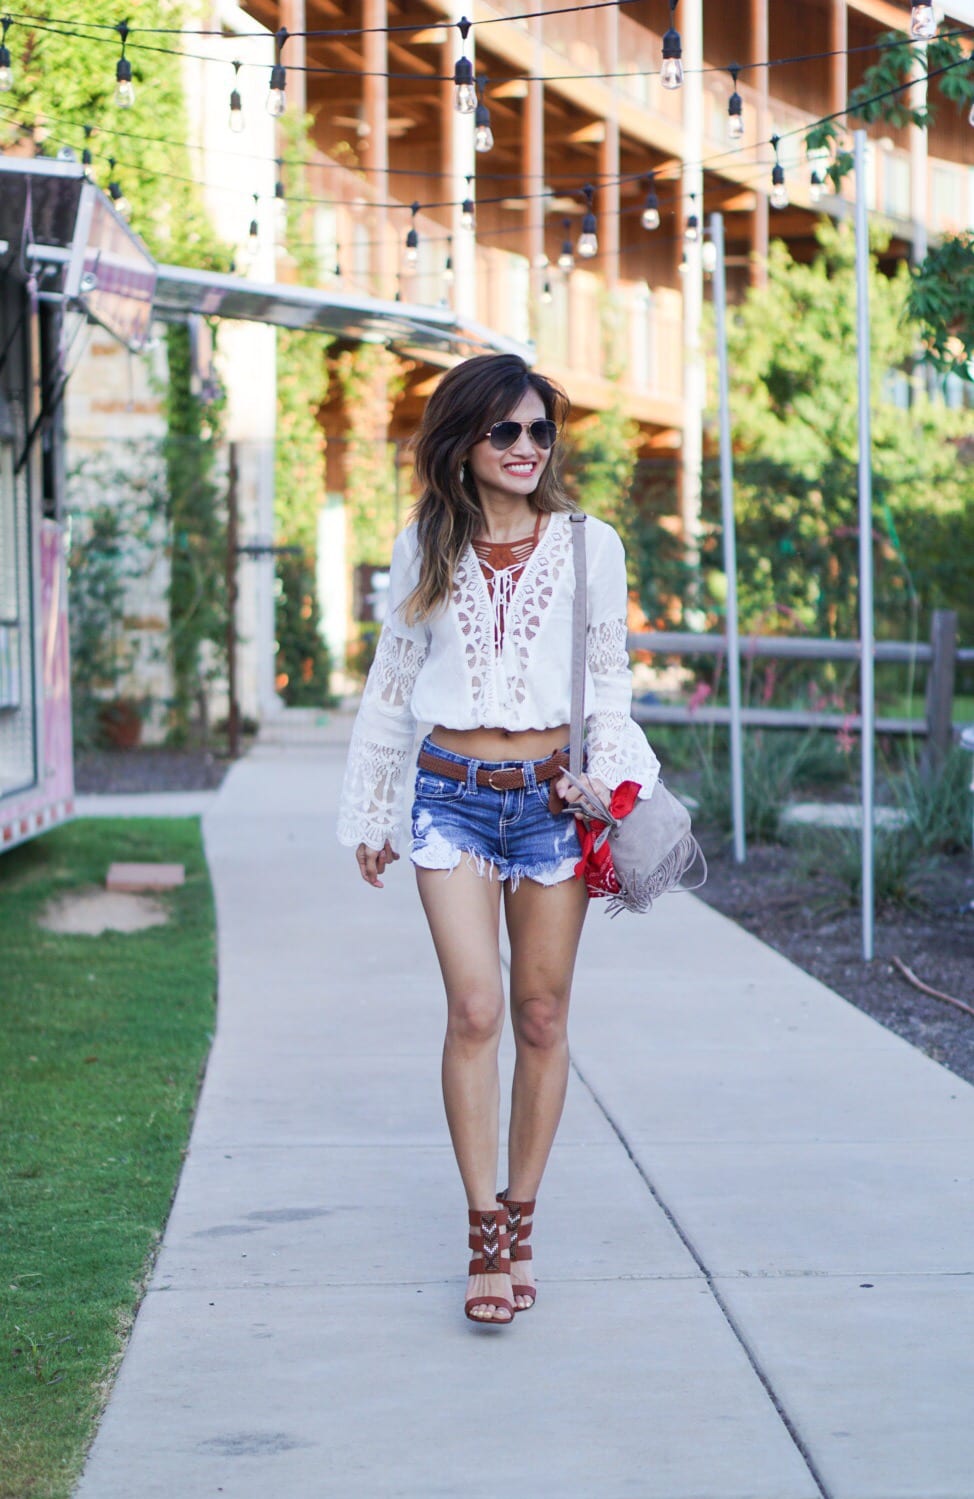 Boho Chic - Lace ups and Bralettes - Dawn P. Darnell